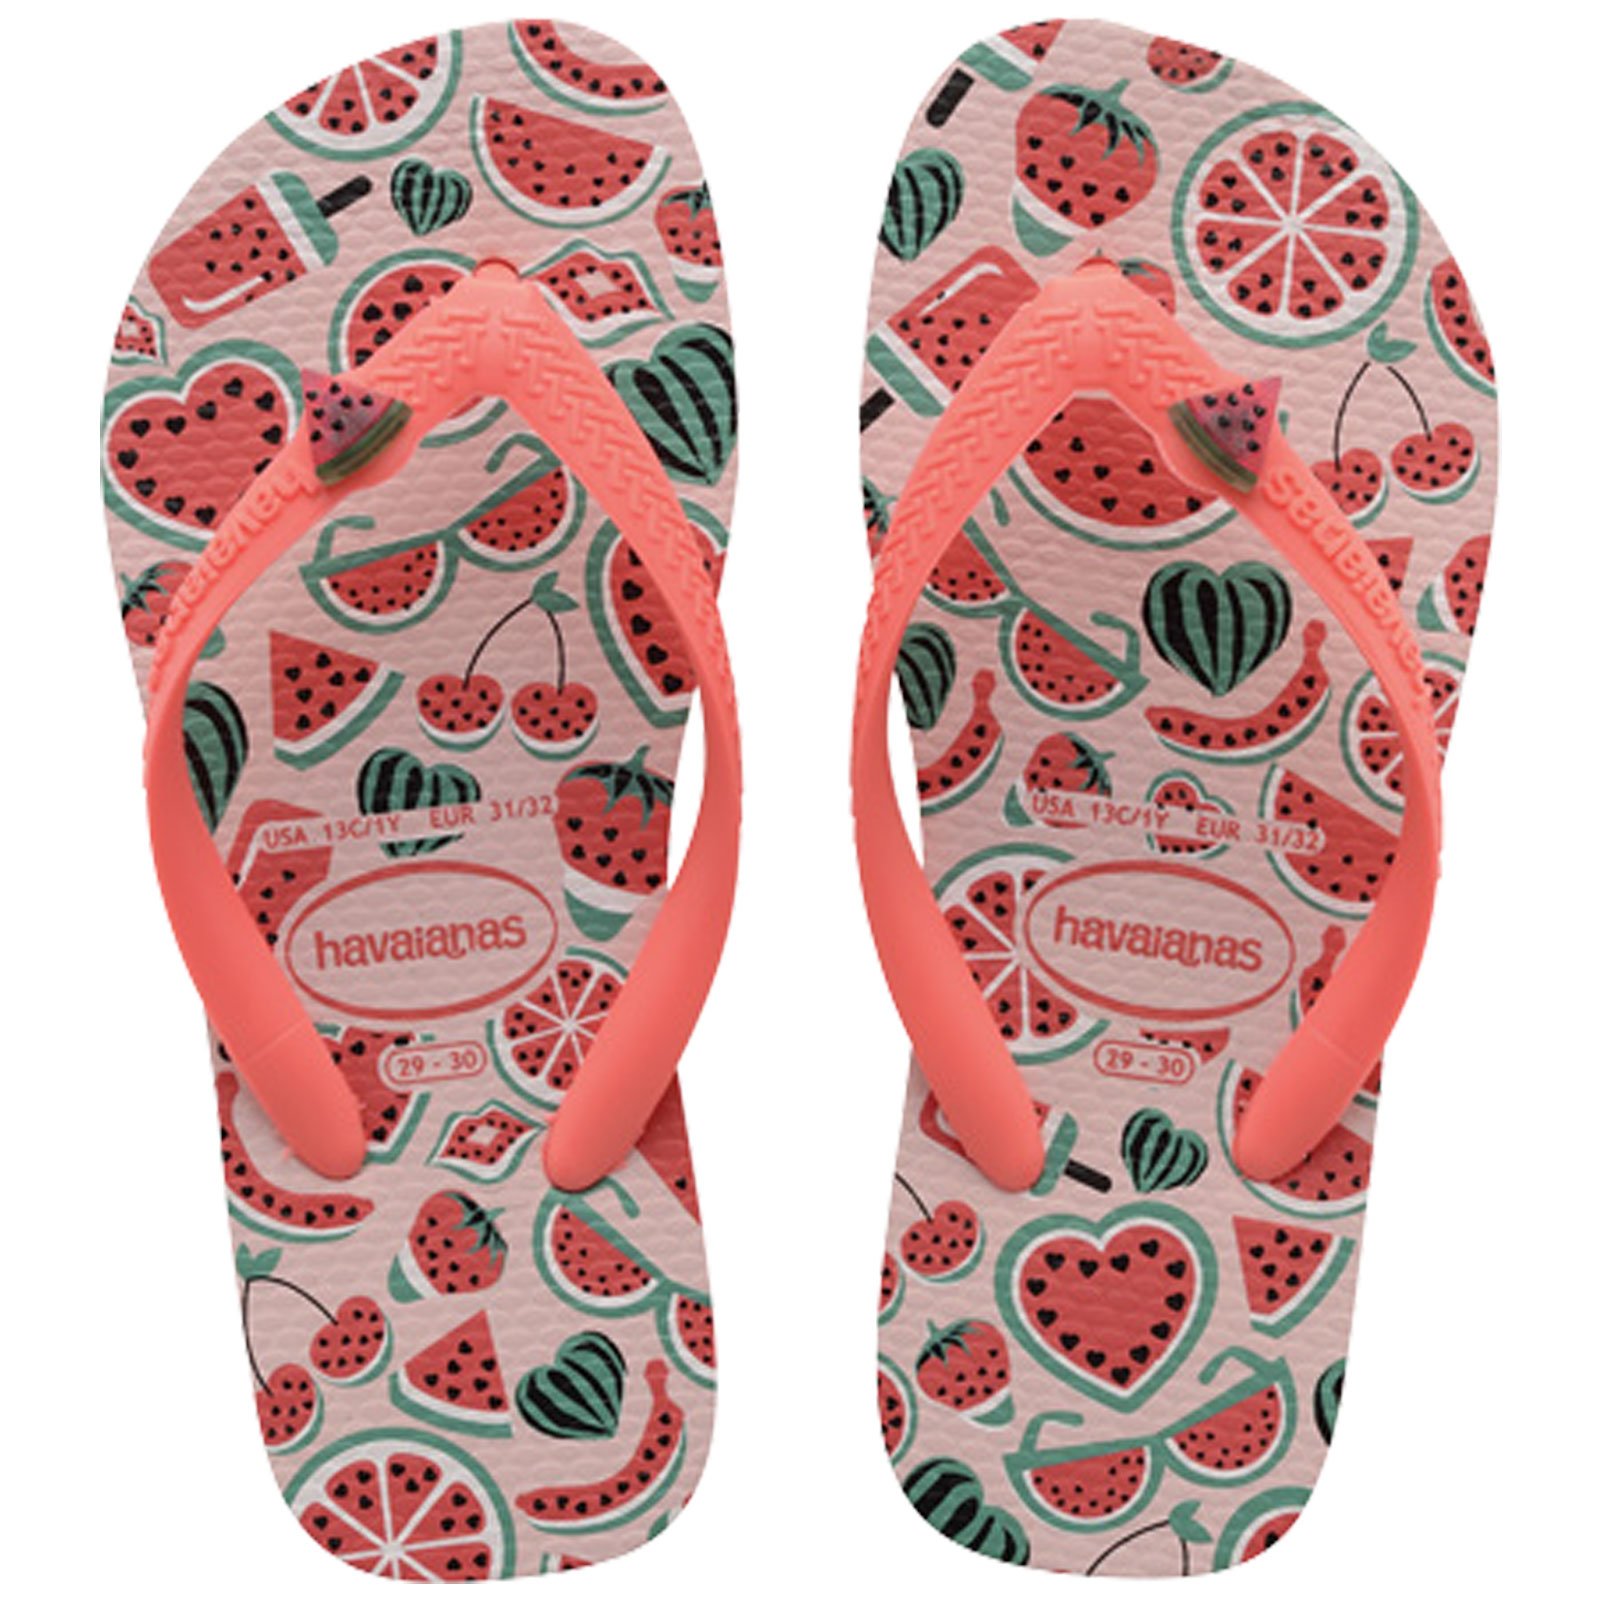 Havaianas Kids Fun Pearl Pink - 100 Days exchange Policy